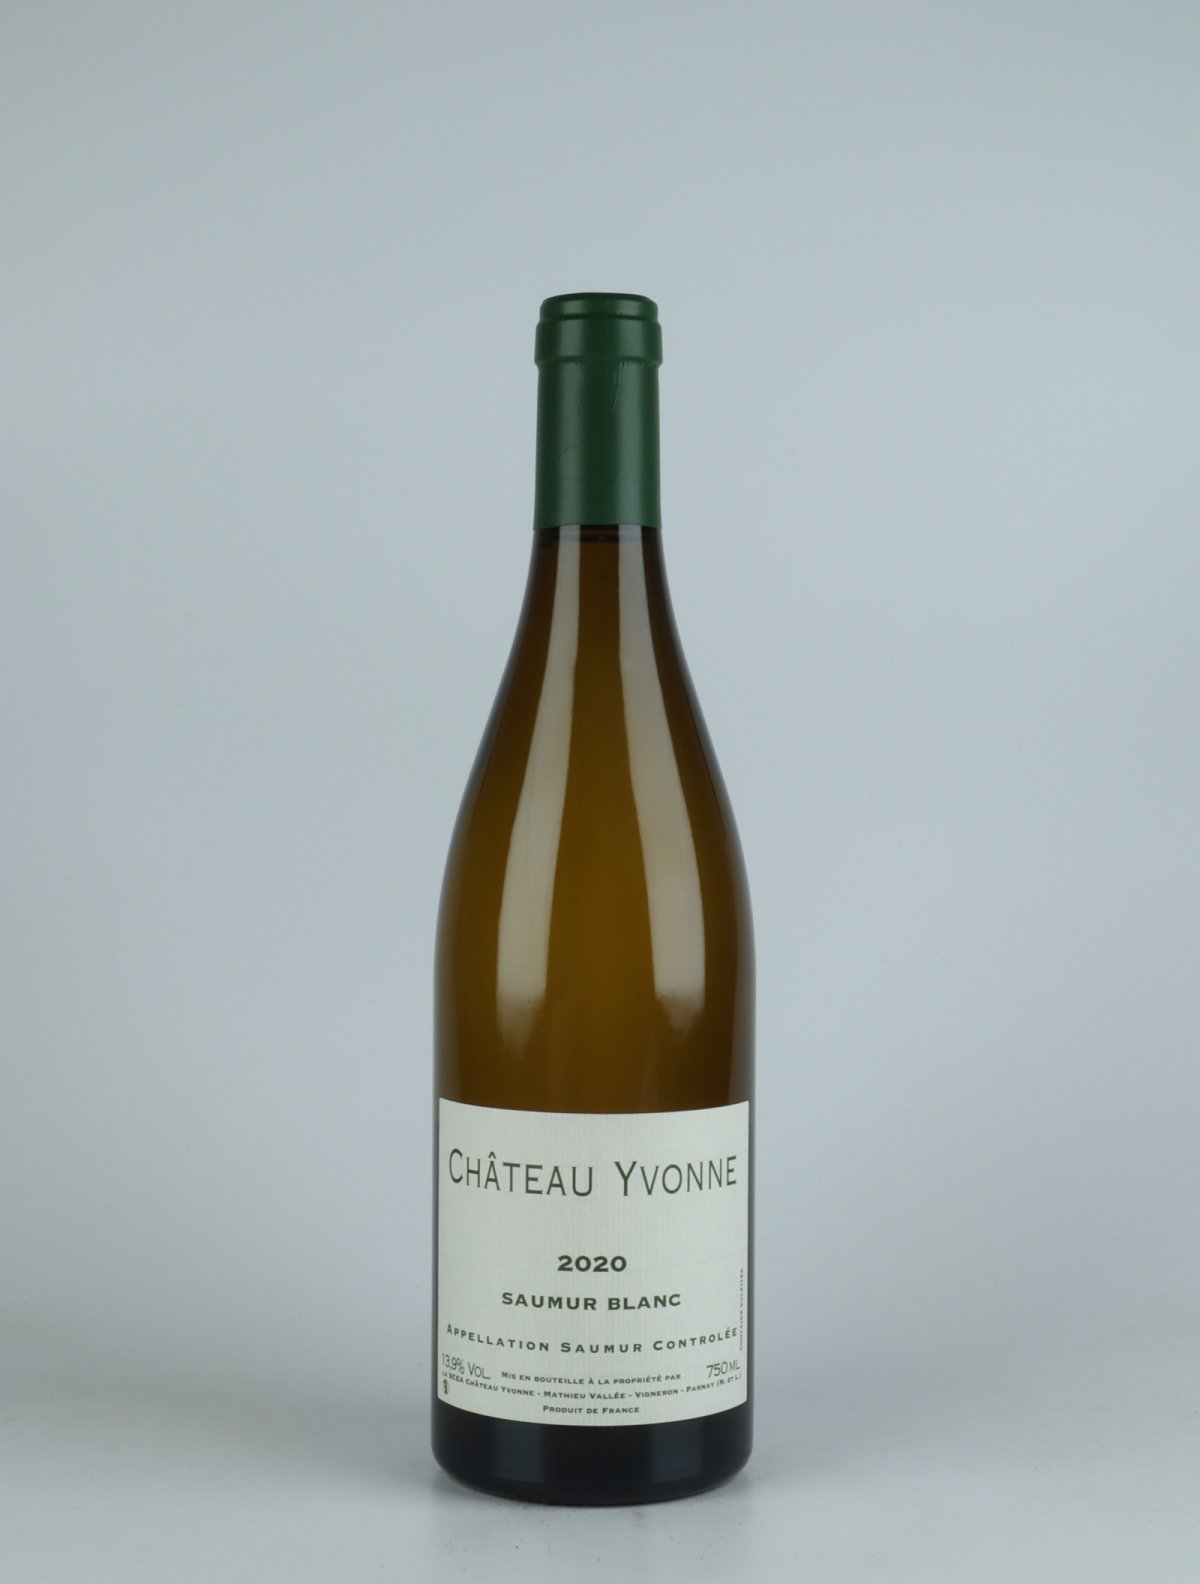 A bottle 2020 Saumur Blanc White wine from Château Yvonne, Loire in France